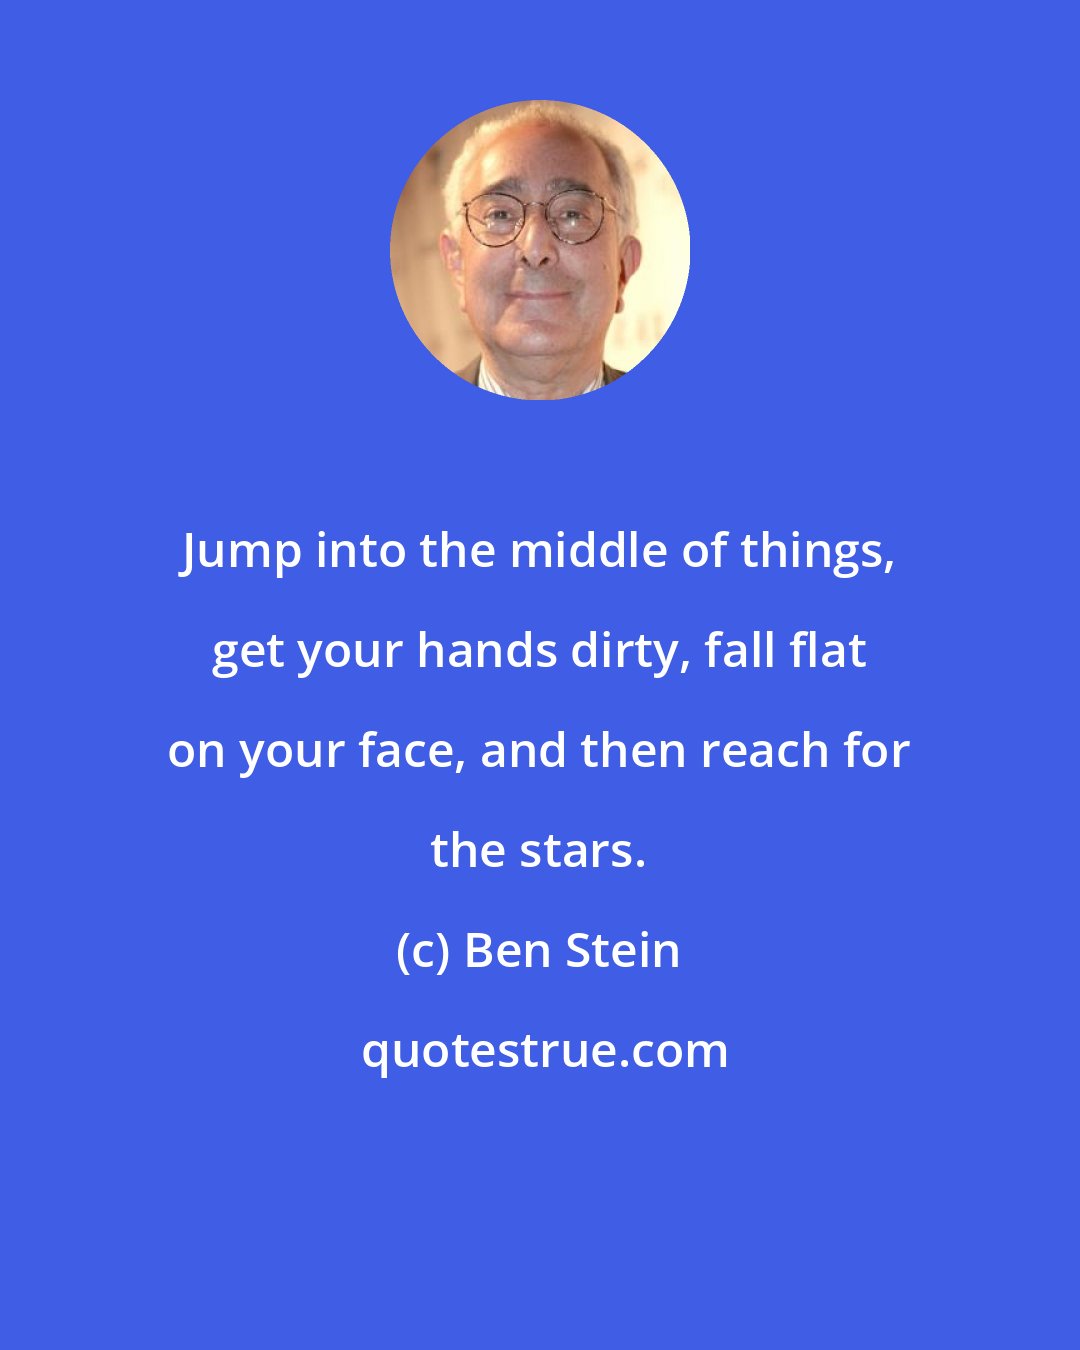 Ben Stein: Jump into the middle of things, get your hands dirty, fall flat on your face, and then reach for the stars.